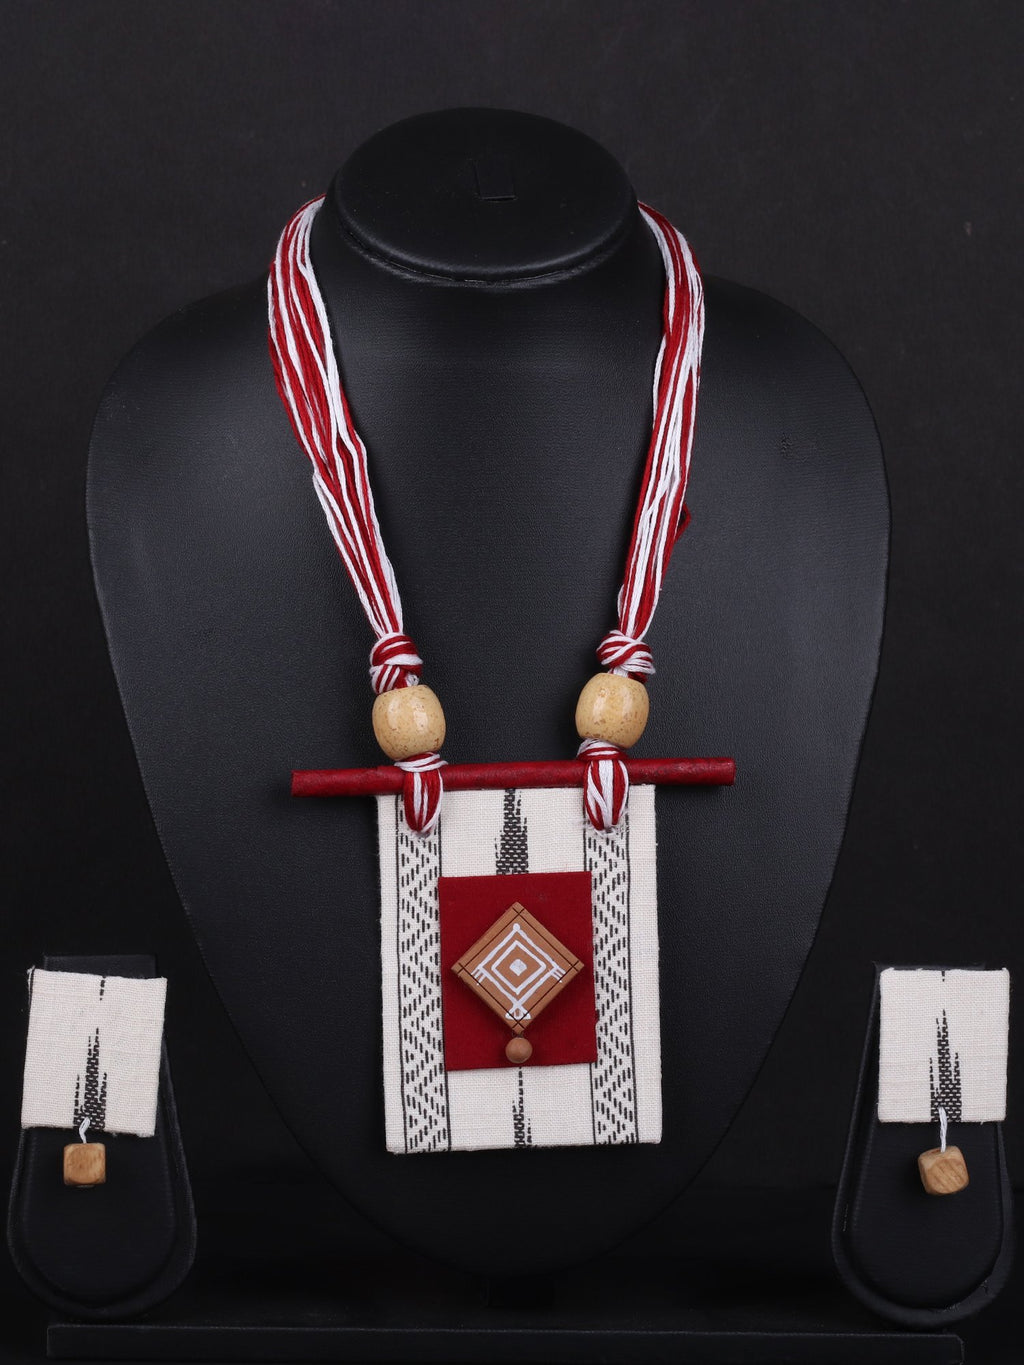 Gorgeous Fabric Necklace Set - A Local Tribe